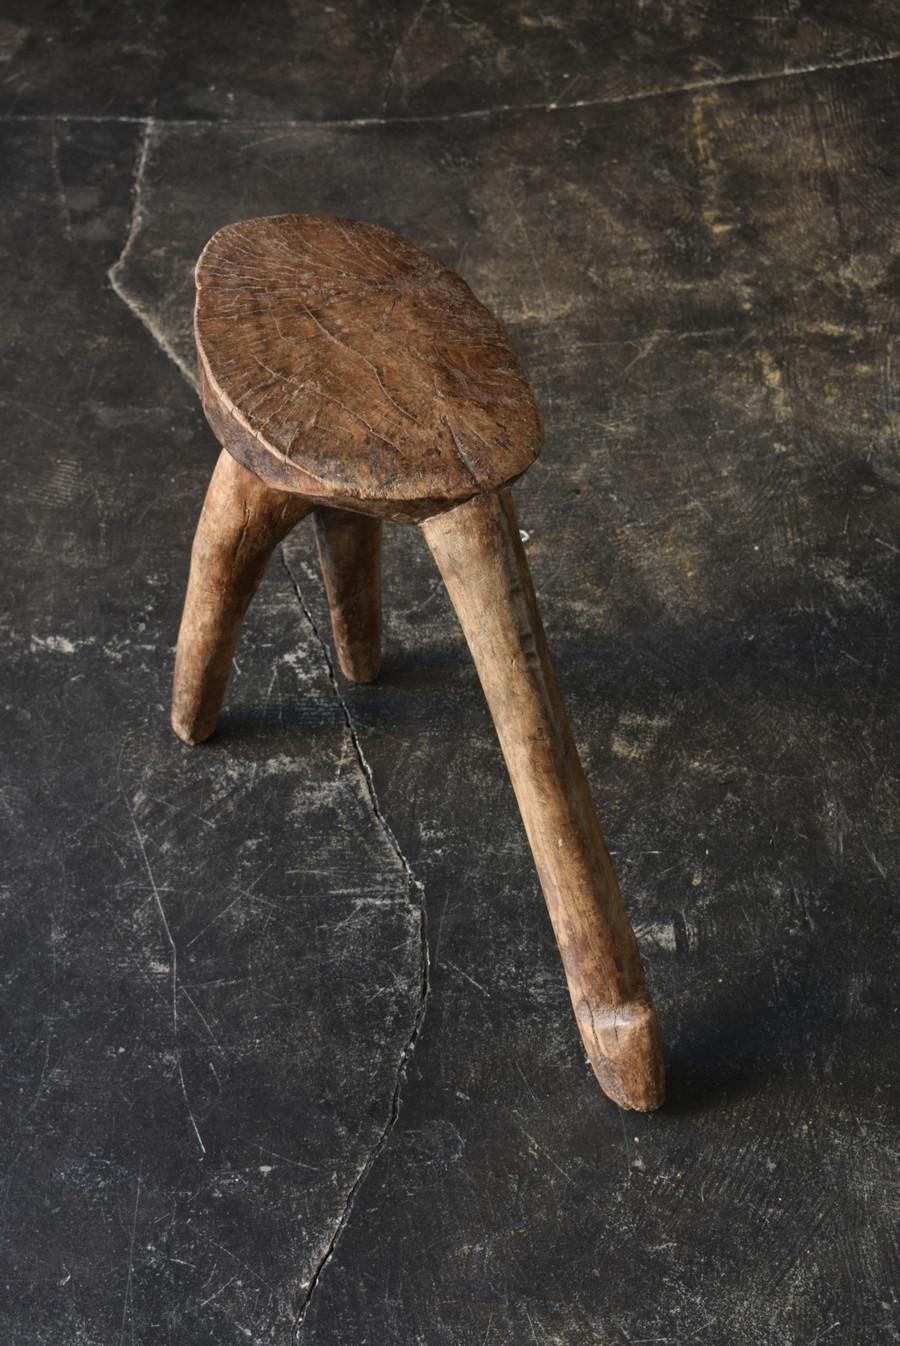 This is a stool used by the Lobi tribe in a country called Burkina Faso in Africa.
It's around the 20th century.
I have heard that this is made by carving into such a shape using tree branches and roots.

It was used in real life, so it has a